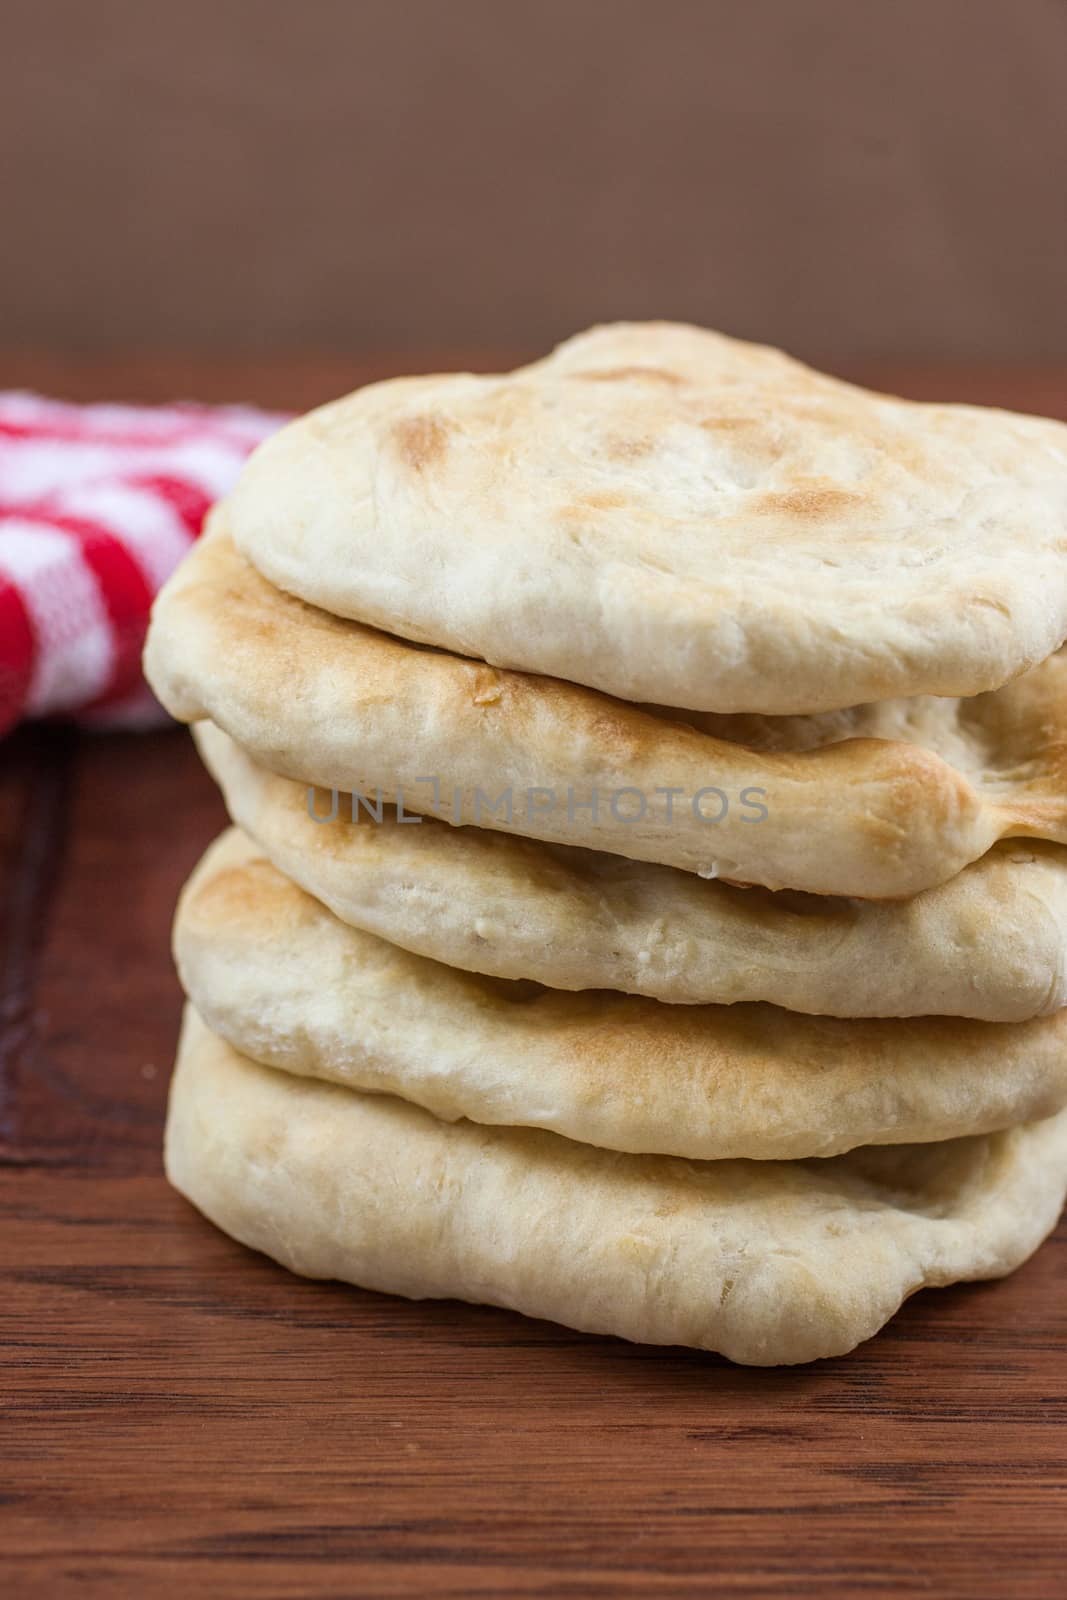 Homemade pita bread sitting on a wooden table with a red cloth in the background.